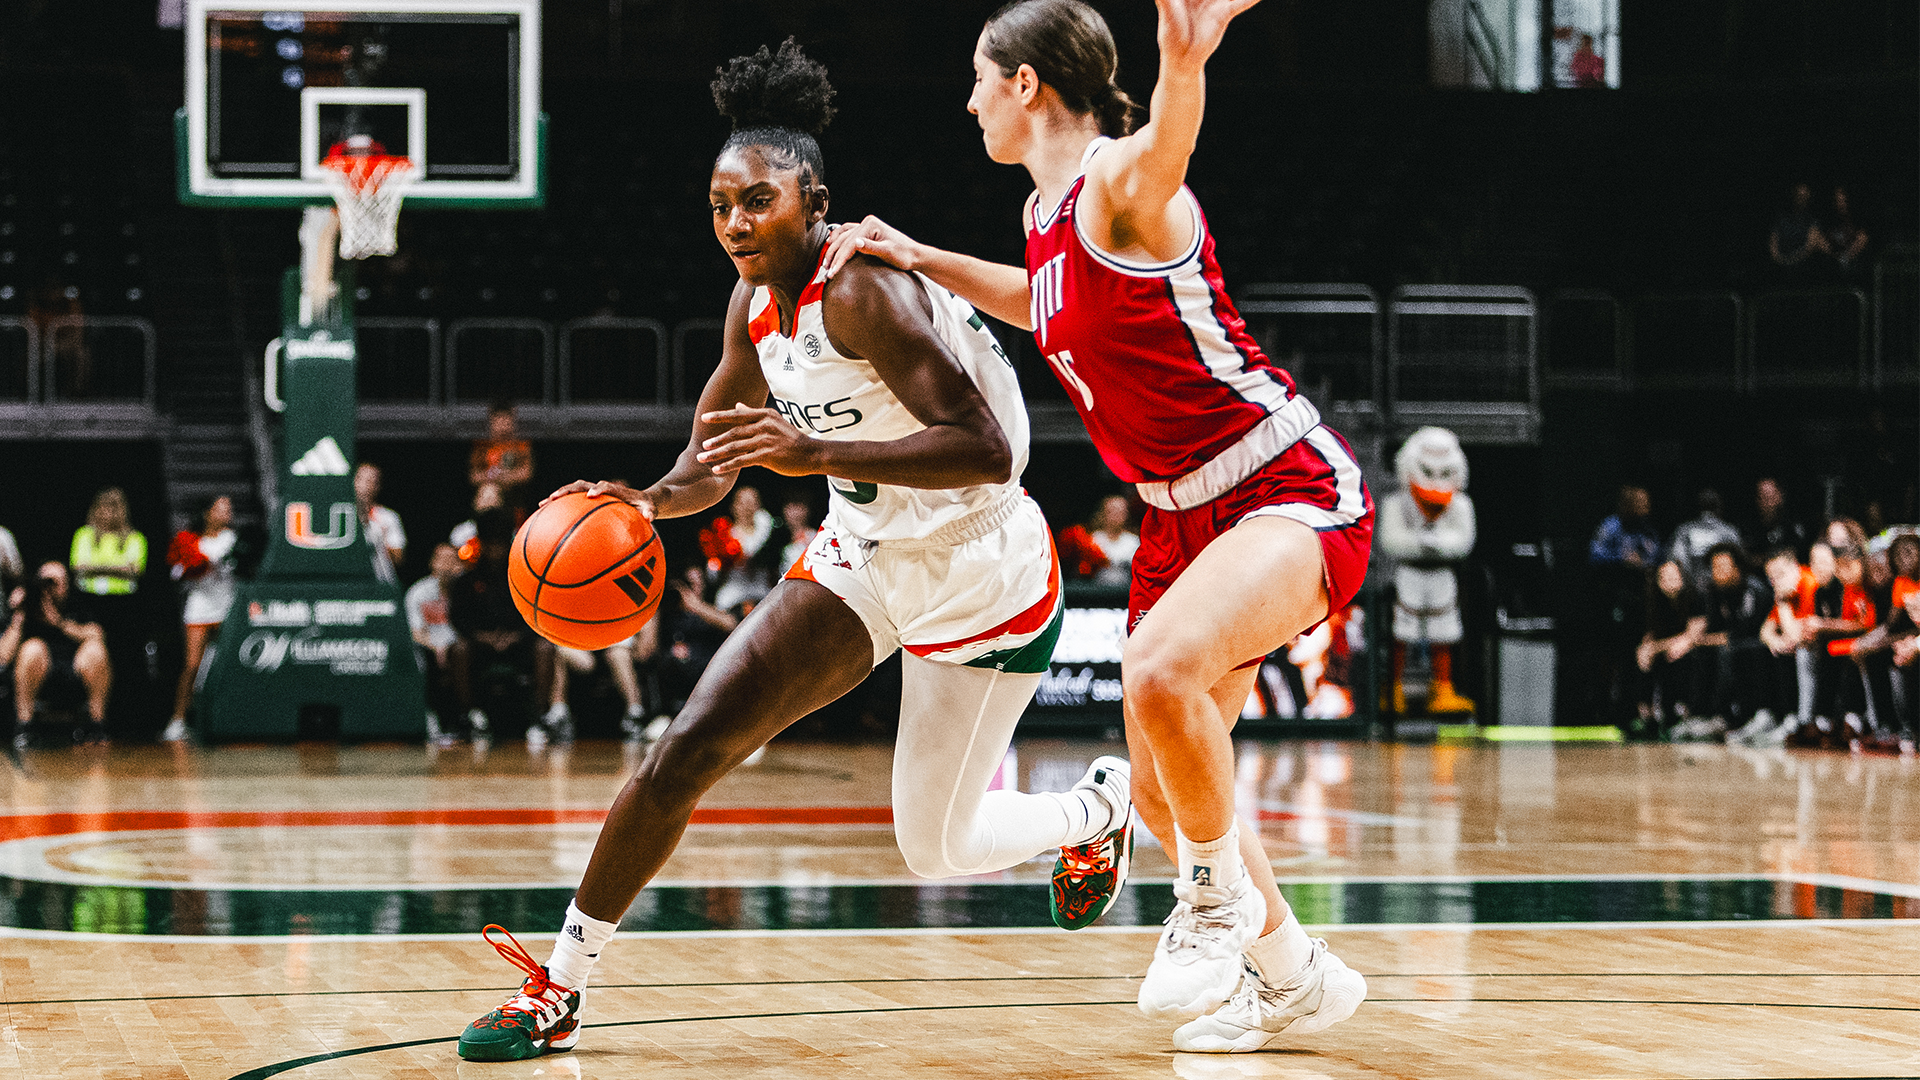 Canes Never Trail in Balanced Win Against NJIT